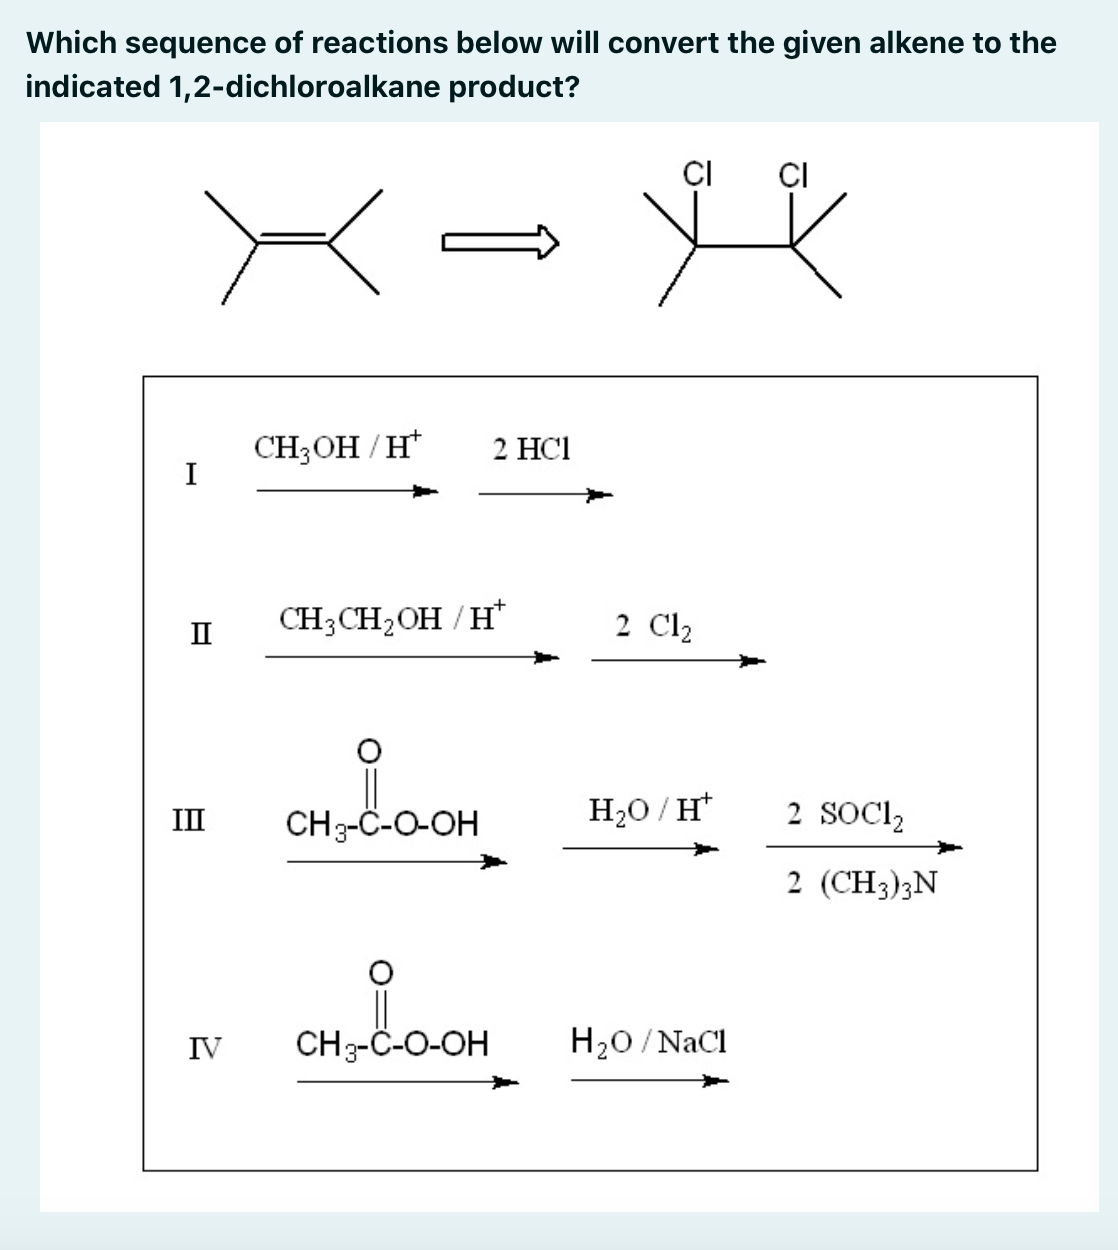 Which sequence of reactions below will convert the given alkene to the
indicated 1,2-dichloroalkane product?
CI
CI
CH3OH / H*
I
2 НCI
CH3CH2OH / H*
2 Cl2
II
CH3-C-O-OH
H20 / H*
2 SOCI,
II
2 (CH3);N
IV
CH3-C-O-OH
H20 /NaCl
